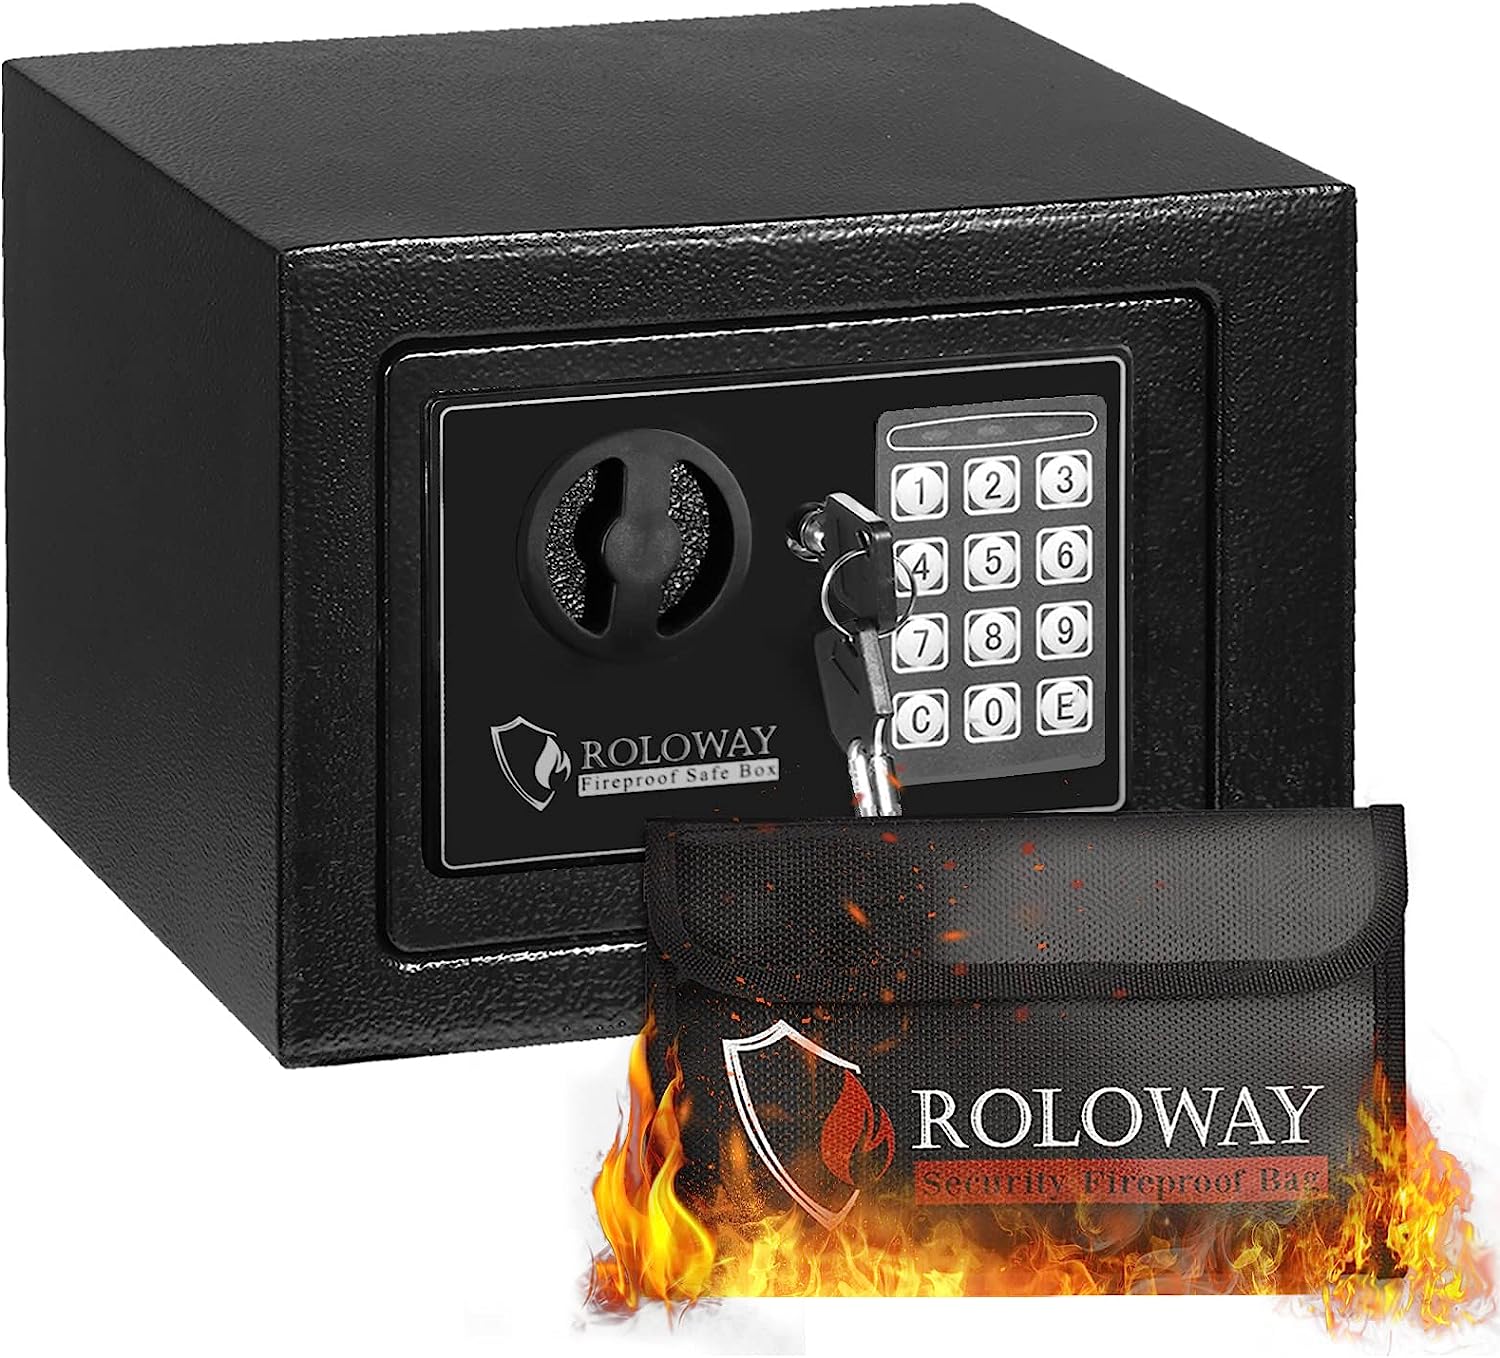 ROLOWAY Steel Electronic Safe Box